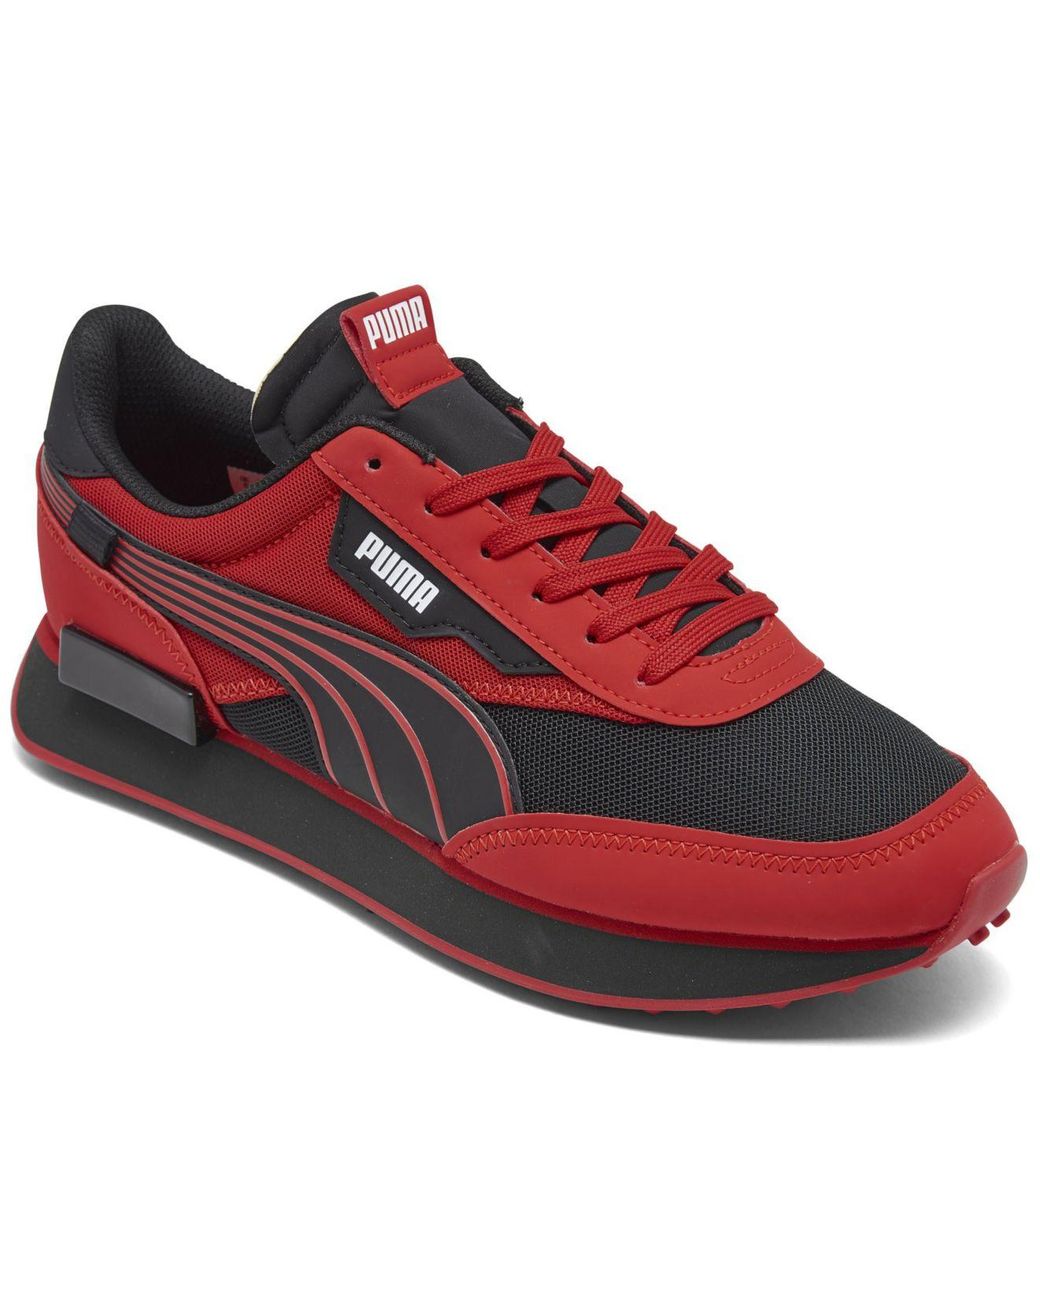 Puma Rider Ripper Shoes In Red For Men Lyst